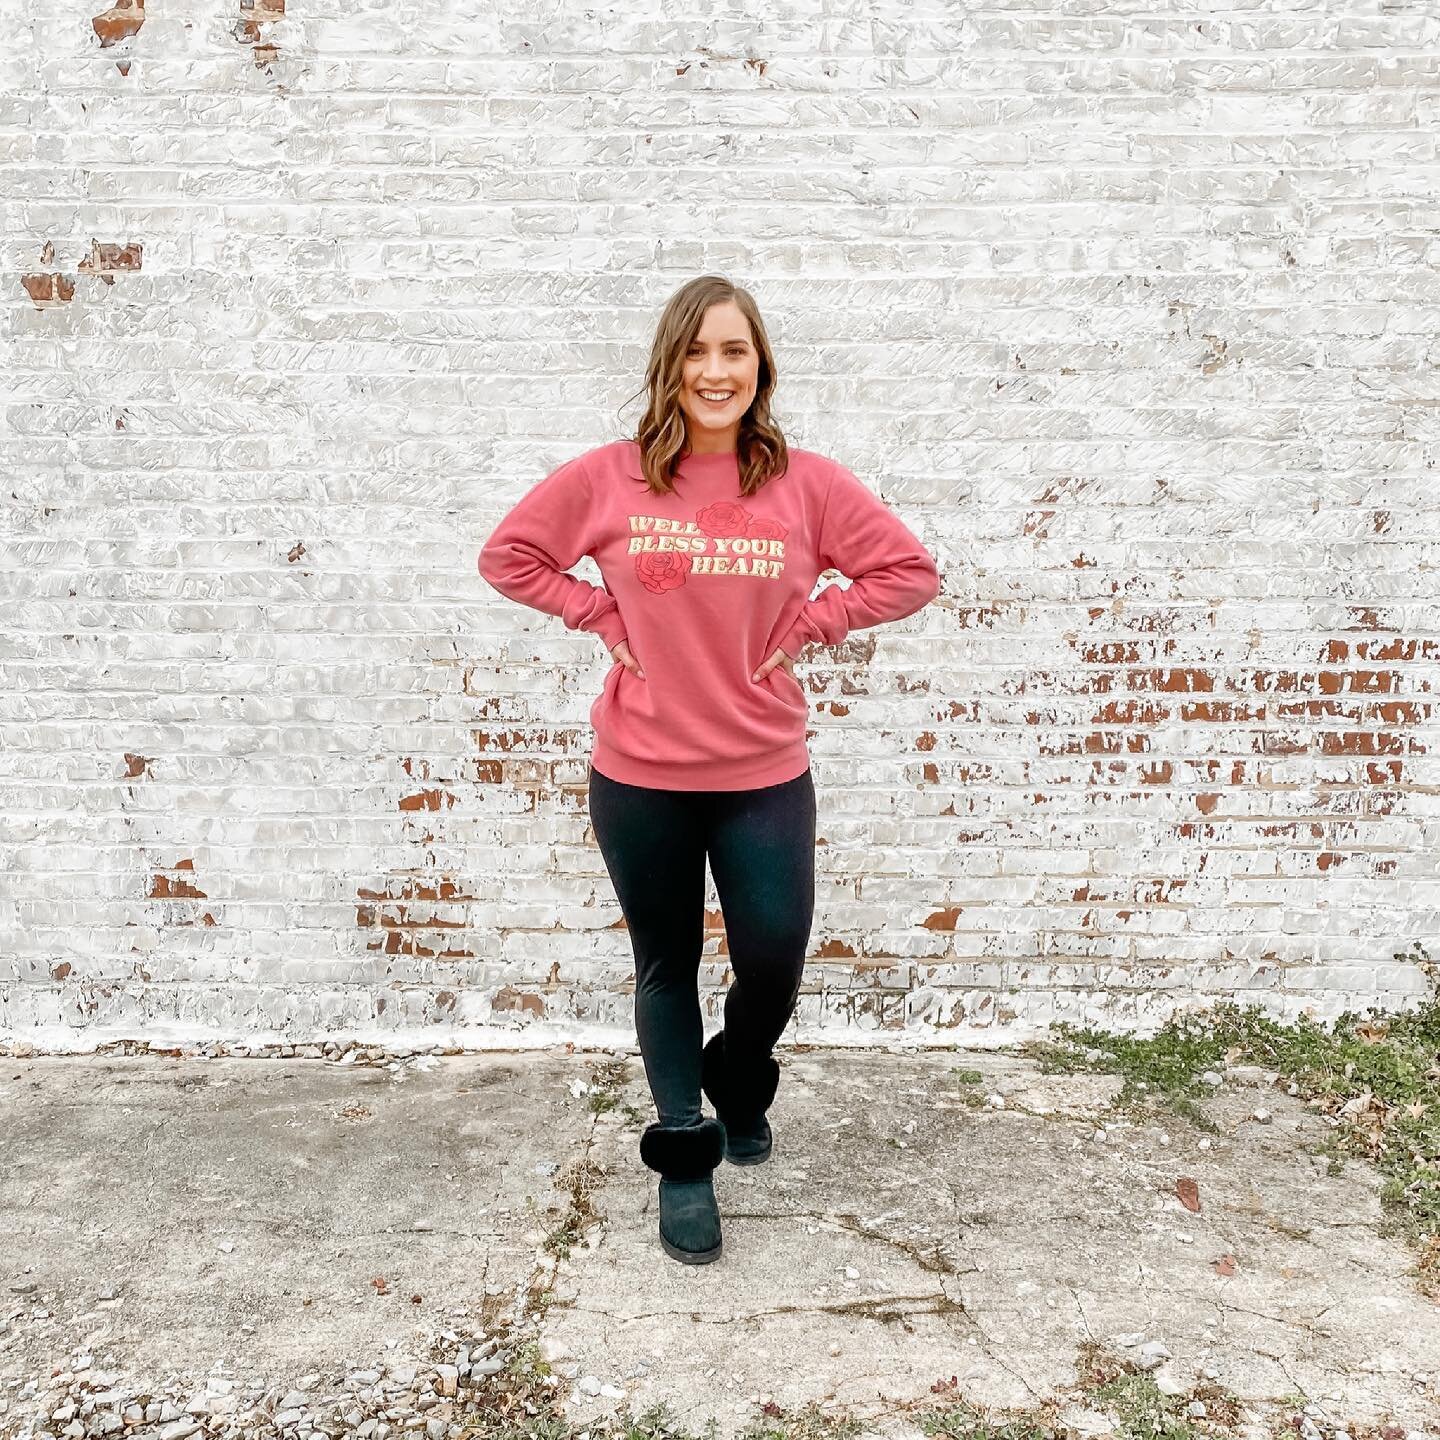 8 days until the first day of spring, and my birthday!! So ready for everything to bloom and the weather to stay warm, even though this sweatshirt is super cute! I love that there are so many meanings for this phrase, which one is your favorite? 😜
.